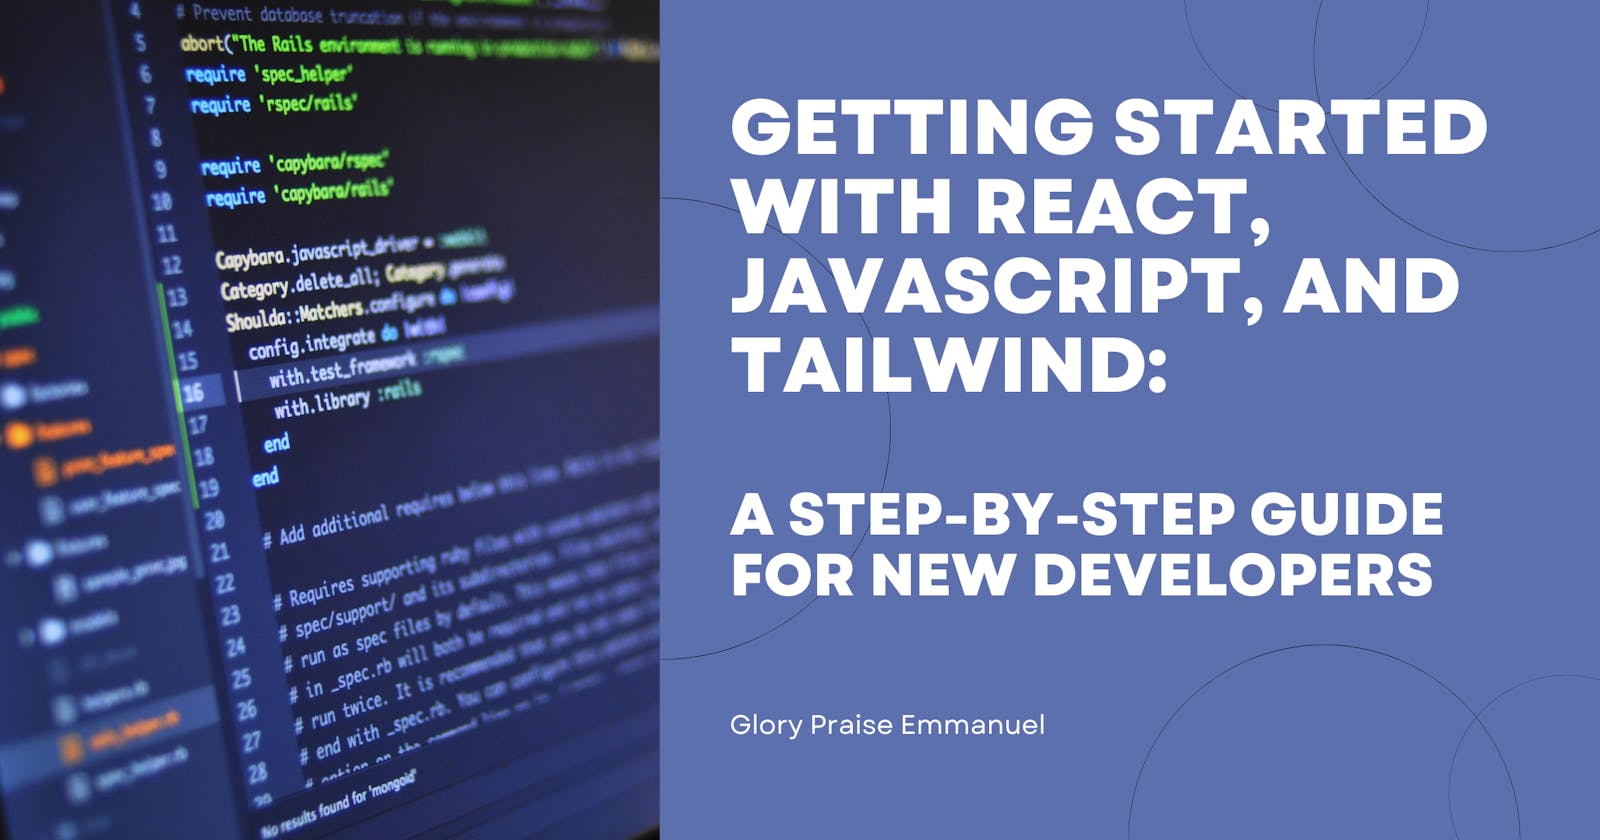 Getting started with React, JavaScript, and Tailwind: A step-by-step guide for new developers